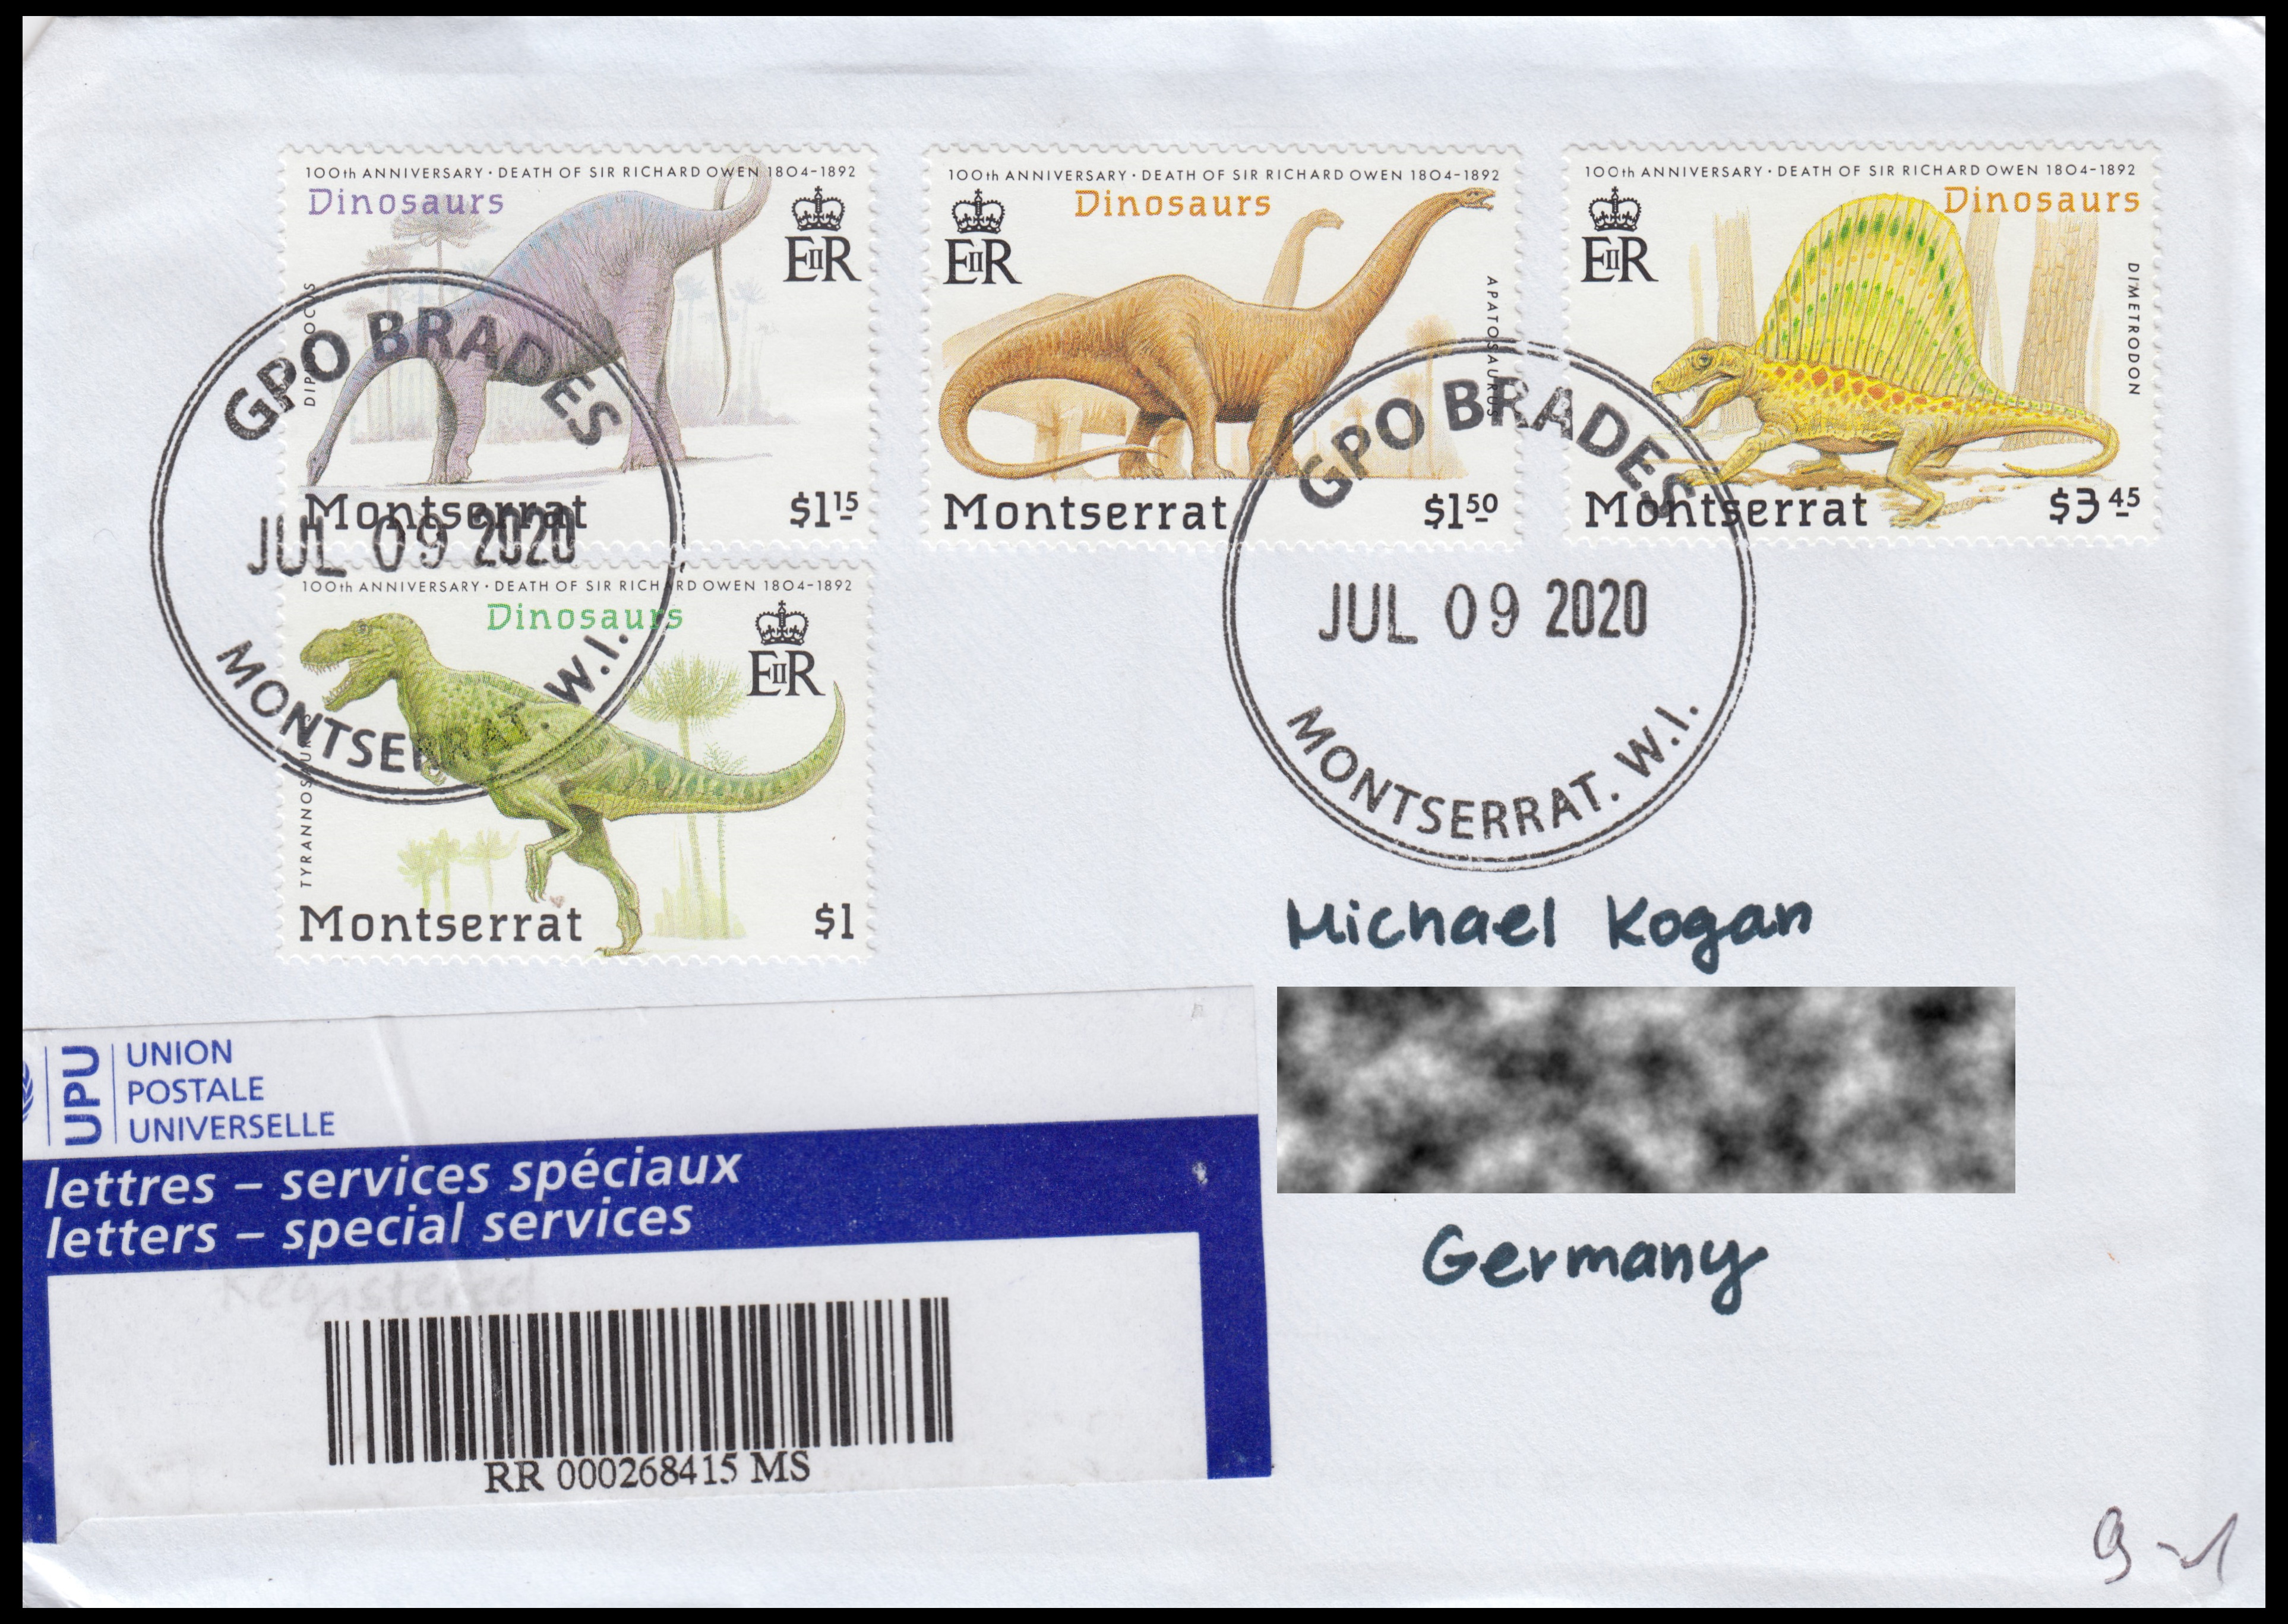 Letter with dinosaur stamps of Montserrat to Germanyo